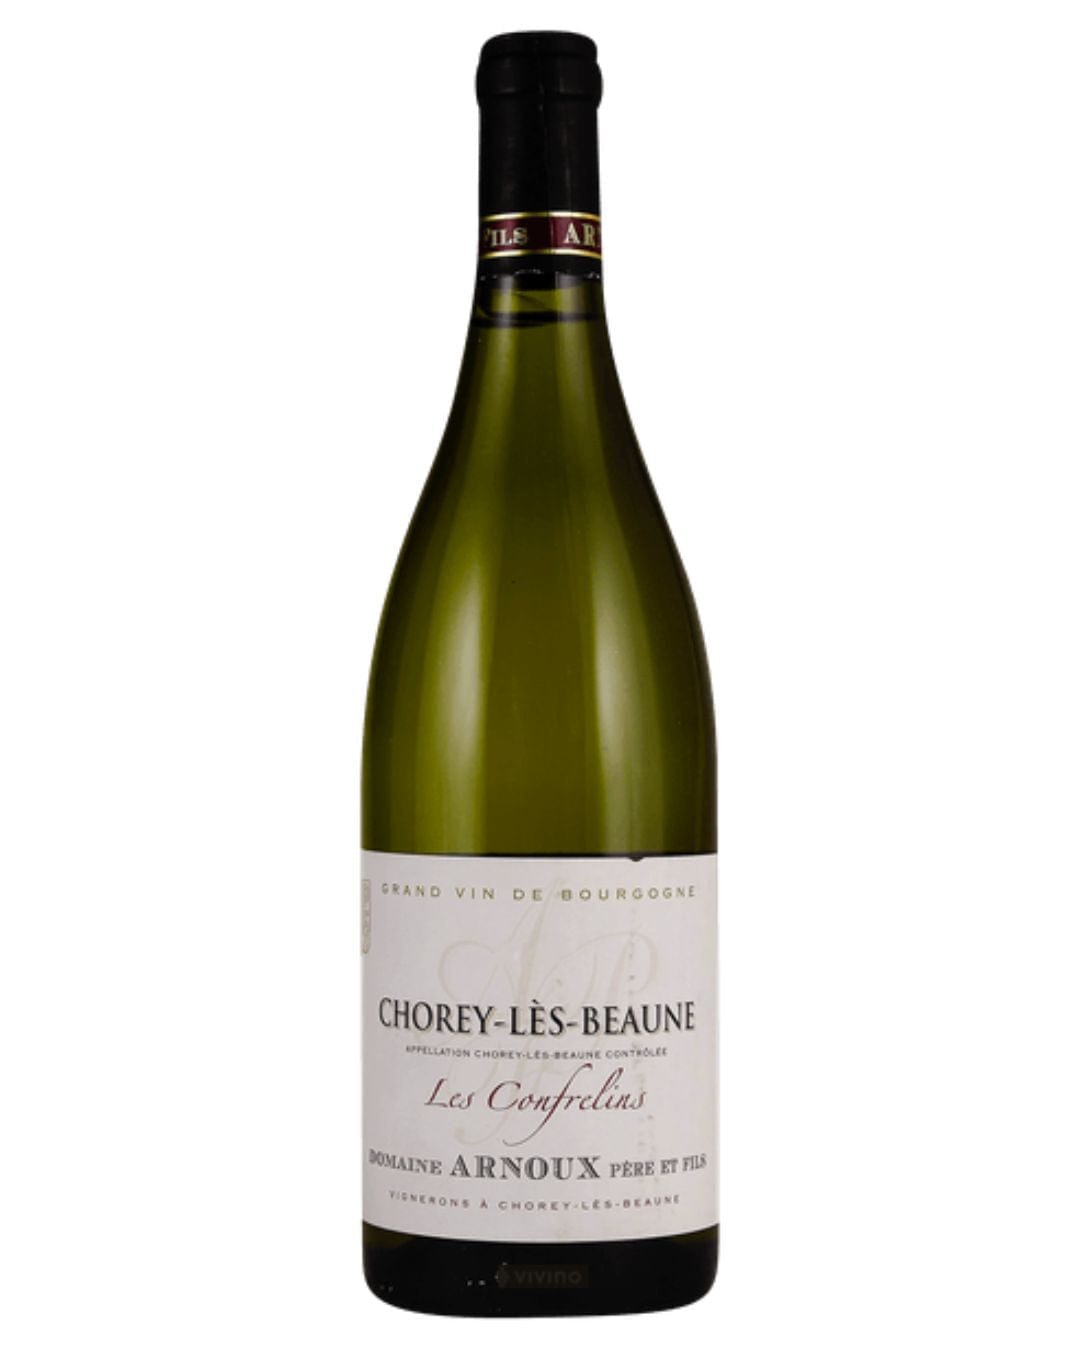 Shop Domaine Armoux Domaine Arnoux Chorey-les-beaune Blanc 2020 online at PENTICTON artisanal French wine store in Hong Kong. Discover other French wines, promotions, workshops and featured offers at pentictonpacific.com 